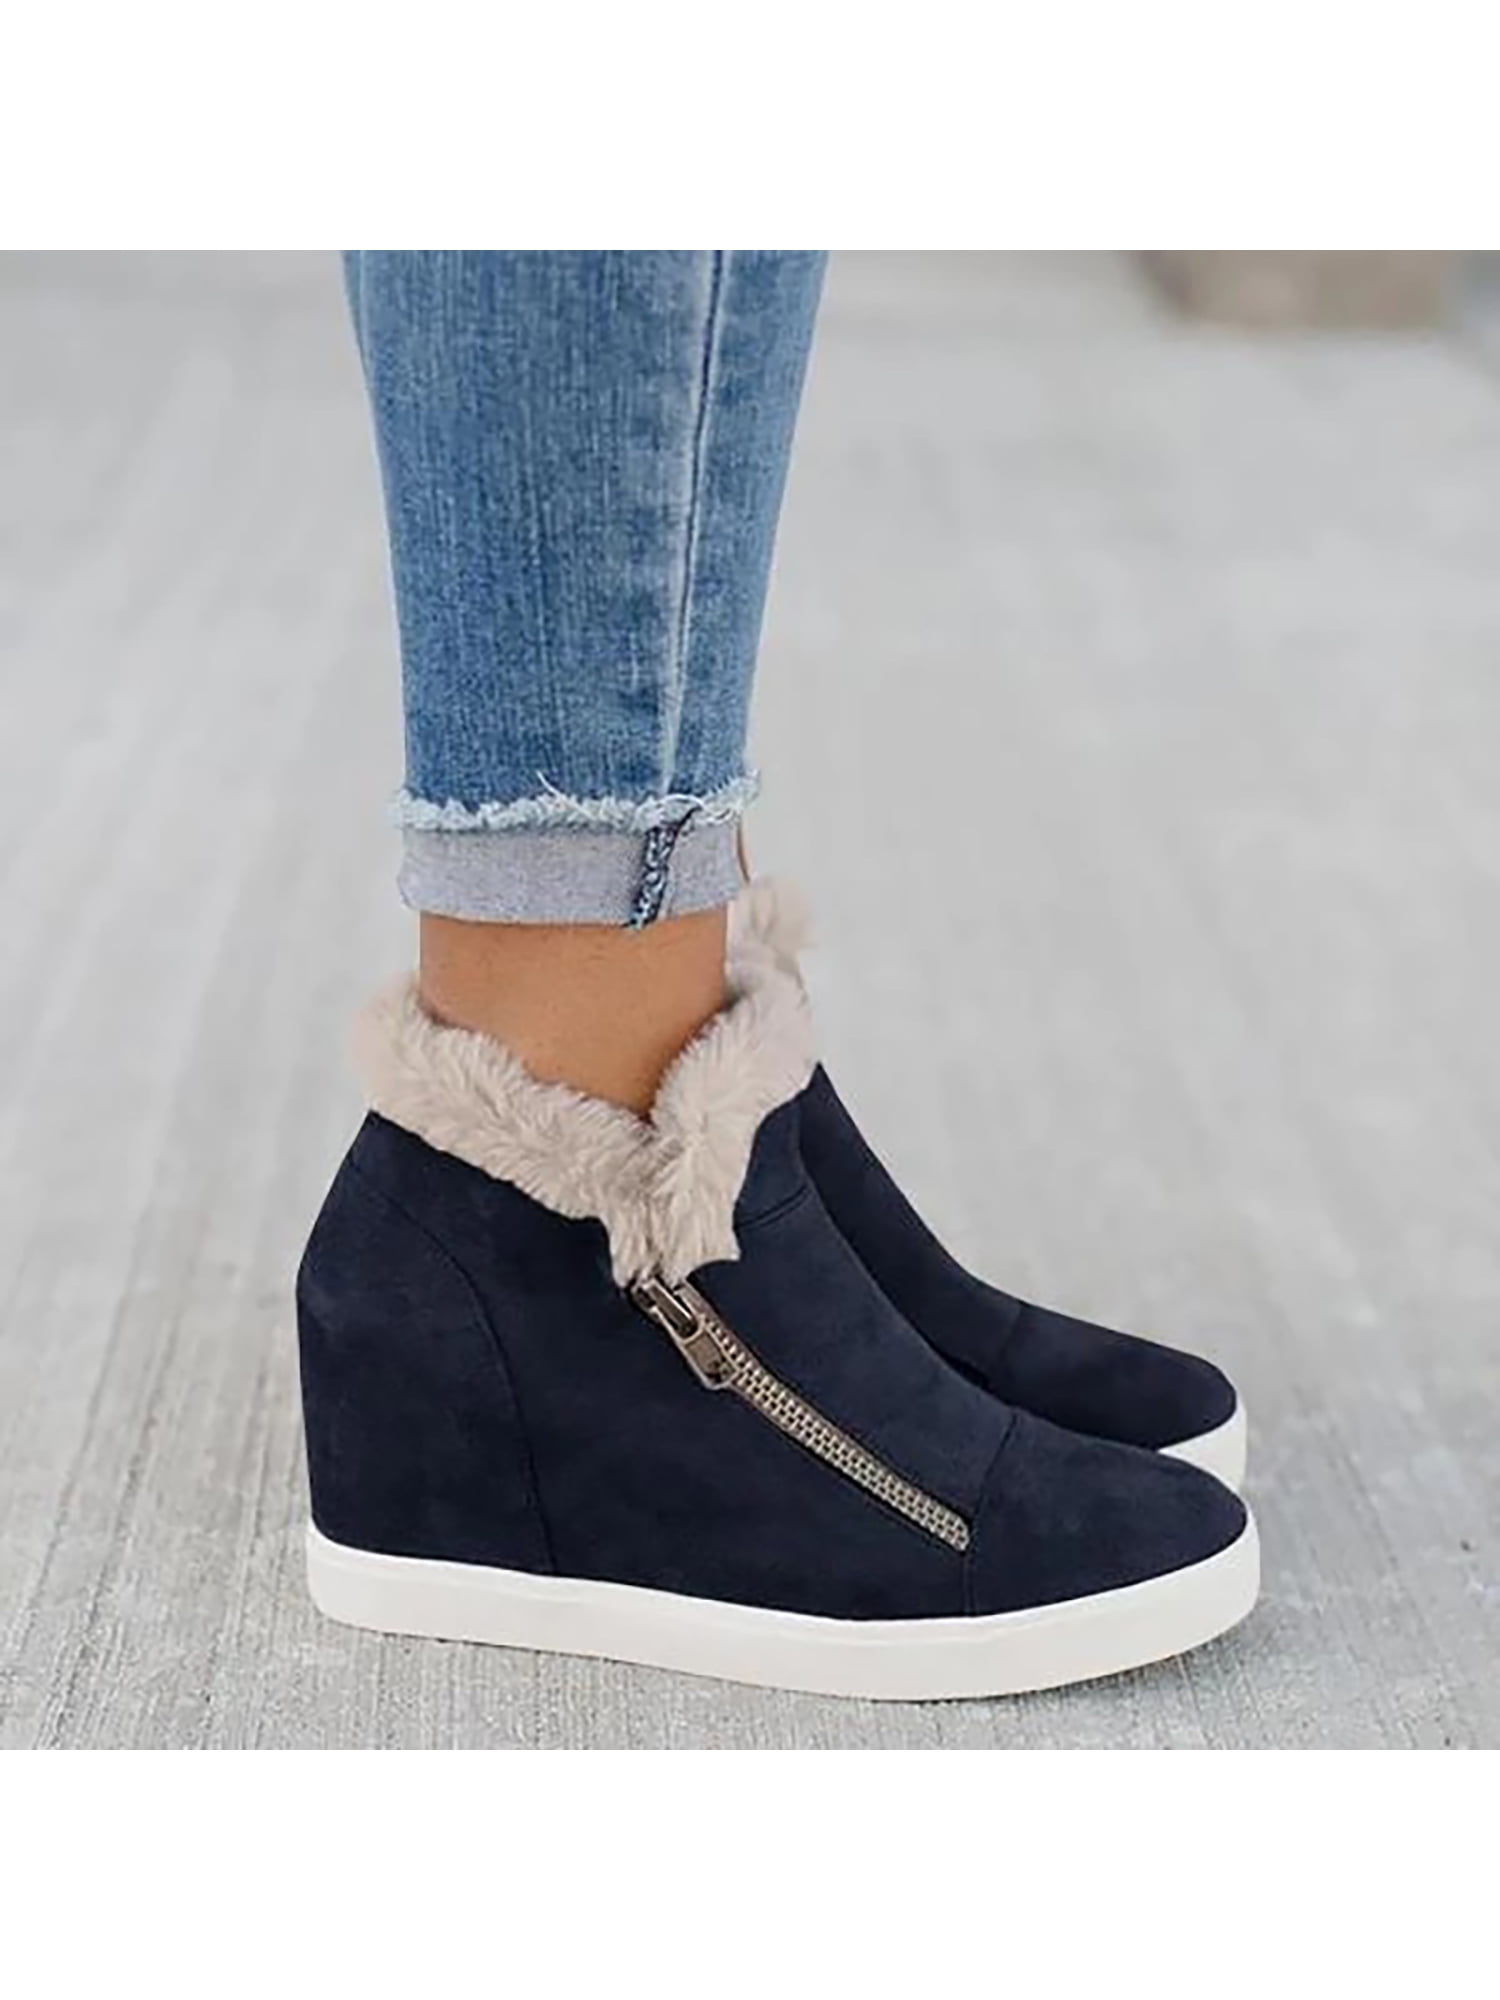 Details about   Vintage Women's Ankle Boots Platform Hidden Wedge Heel Wing Tip Round Toe Shoes